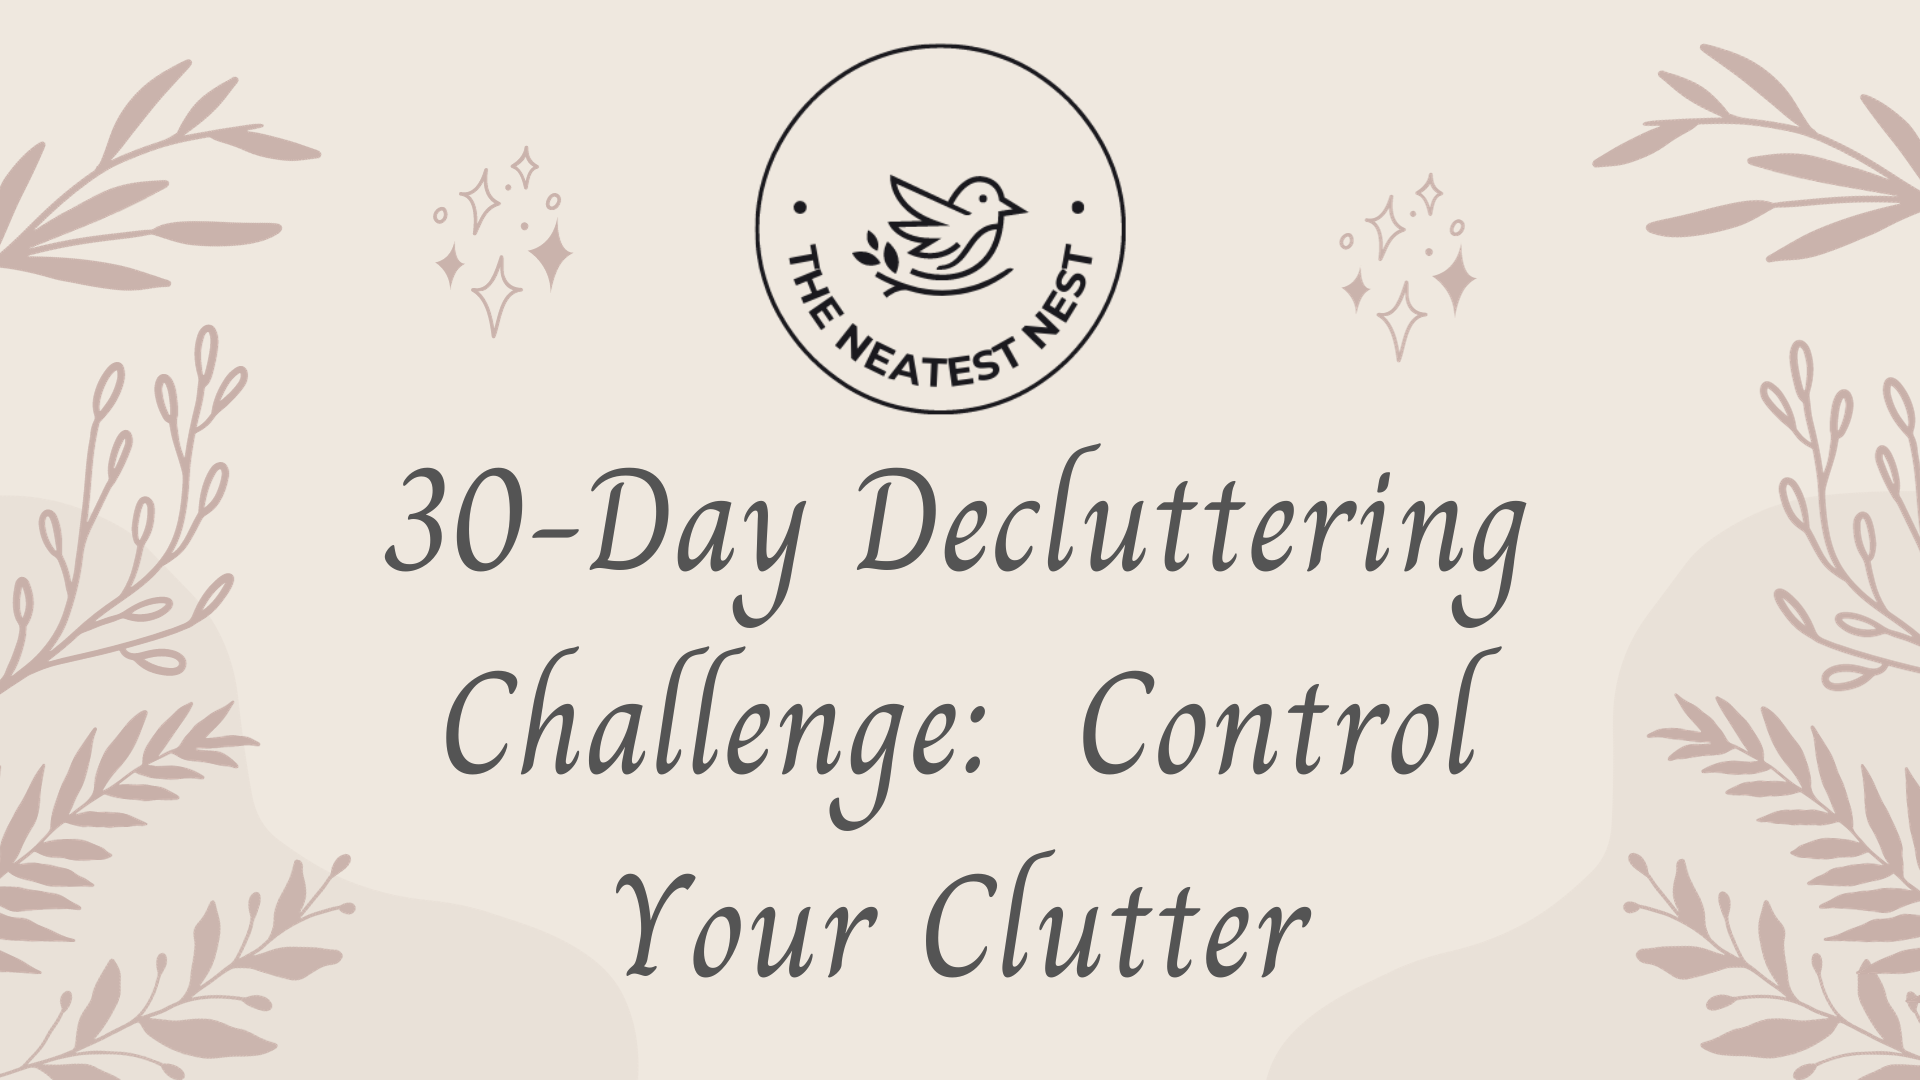 30-Day Decluttering Challenge:  Control Your Clutter